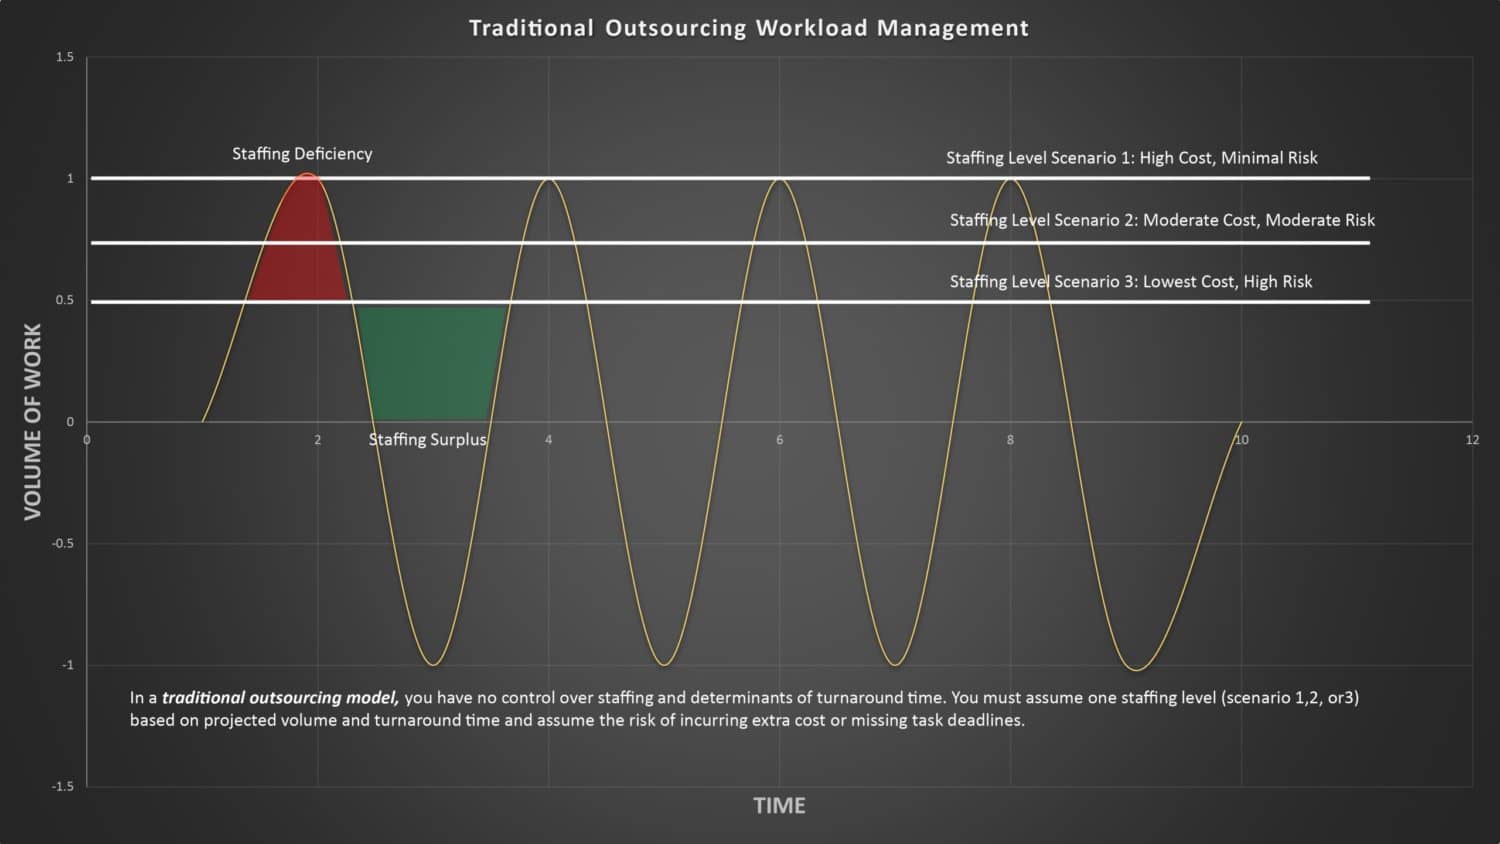 Better workload management: Traditional outsourcing vs. Virtual captive model